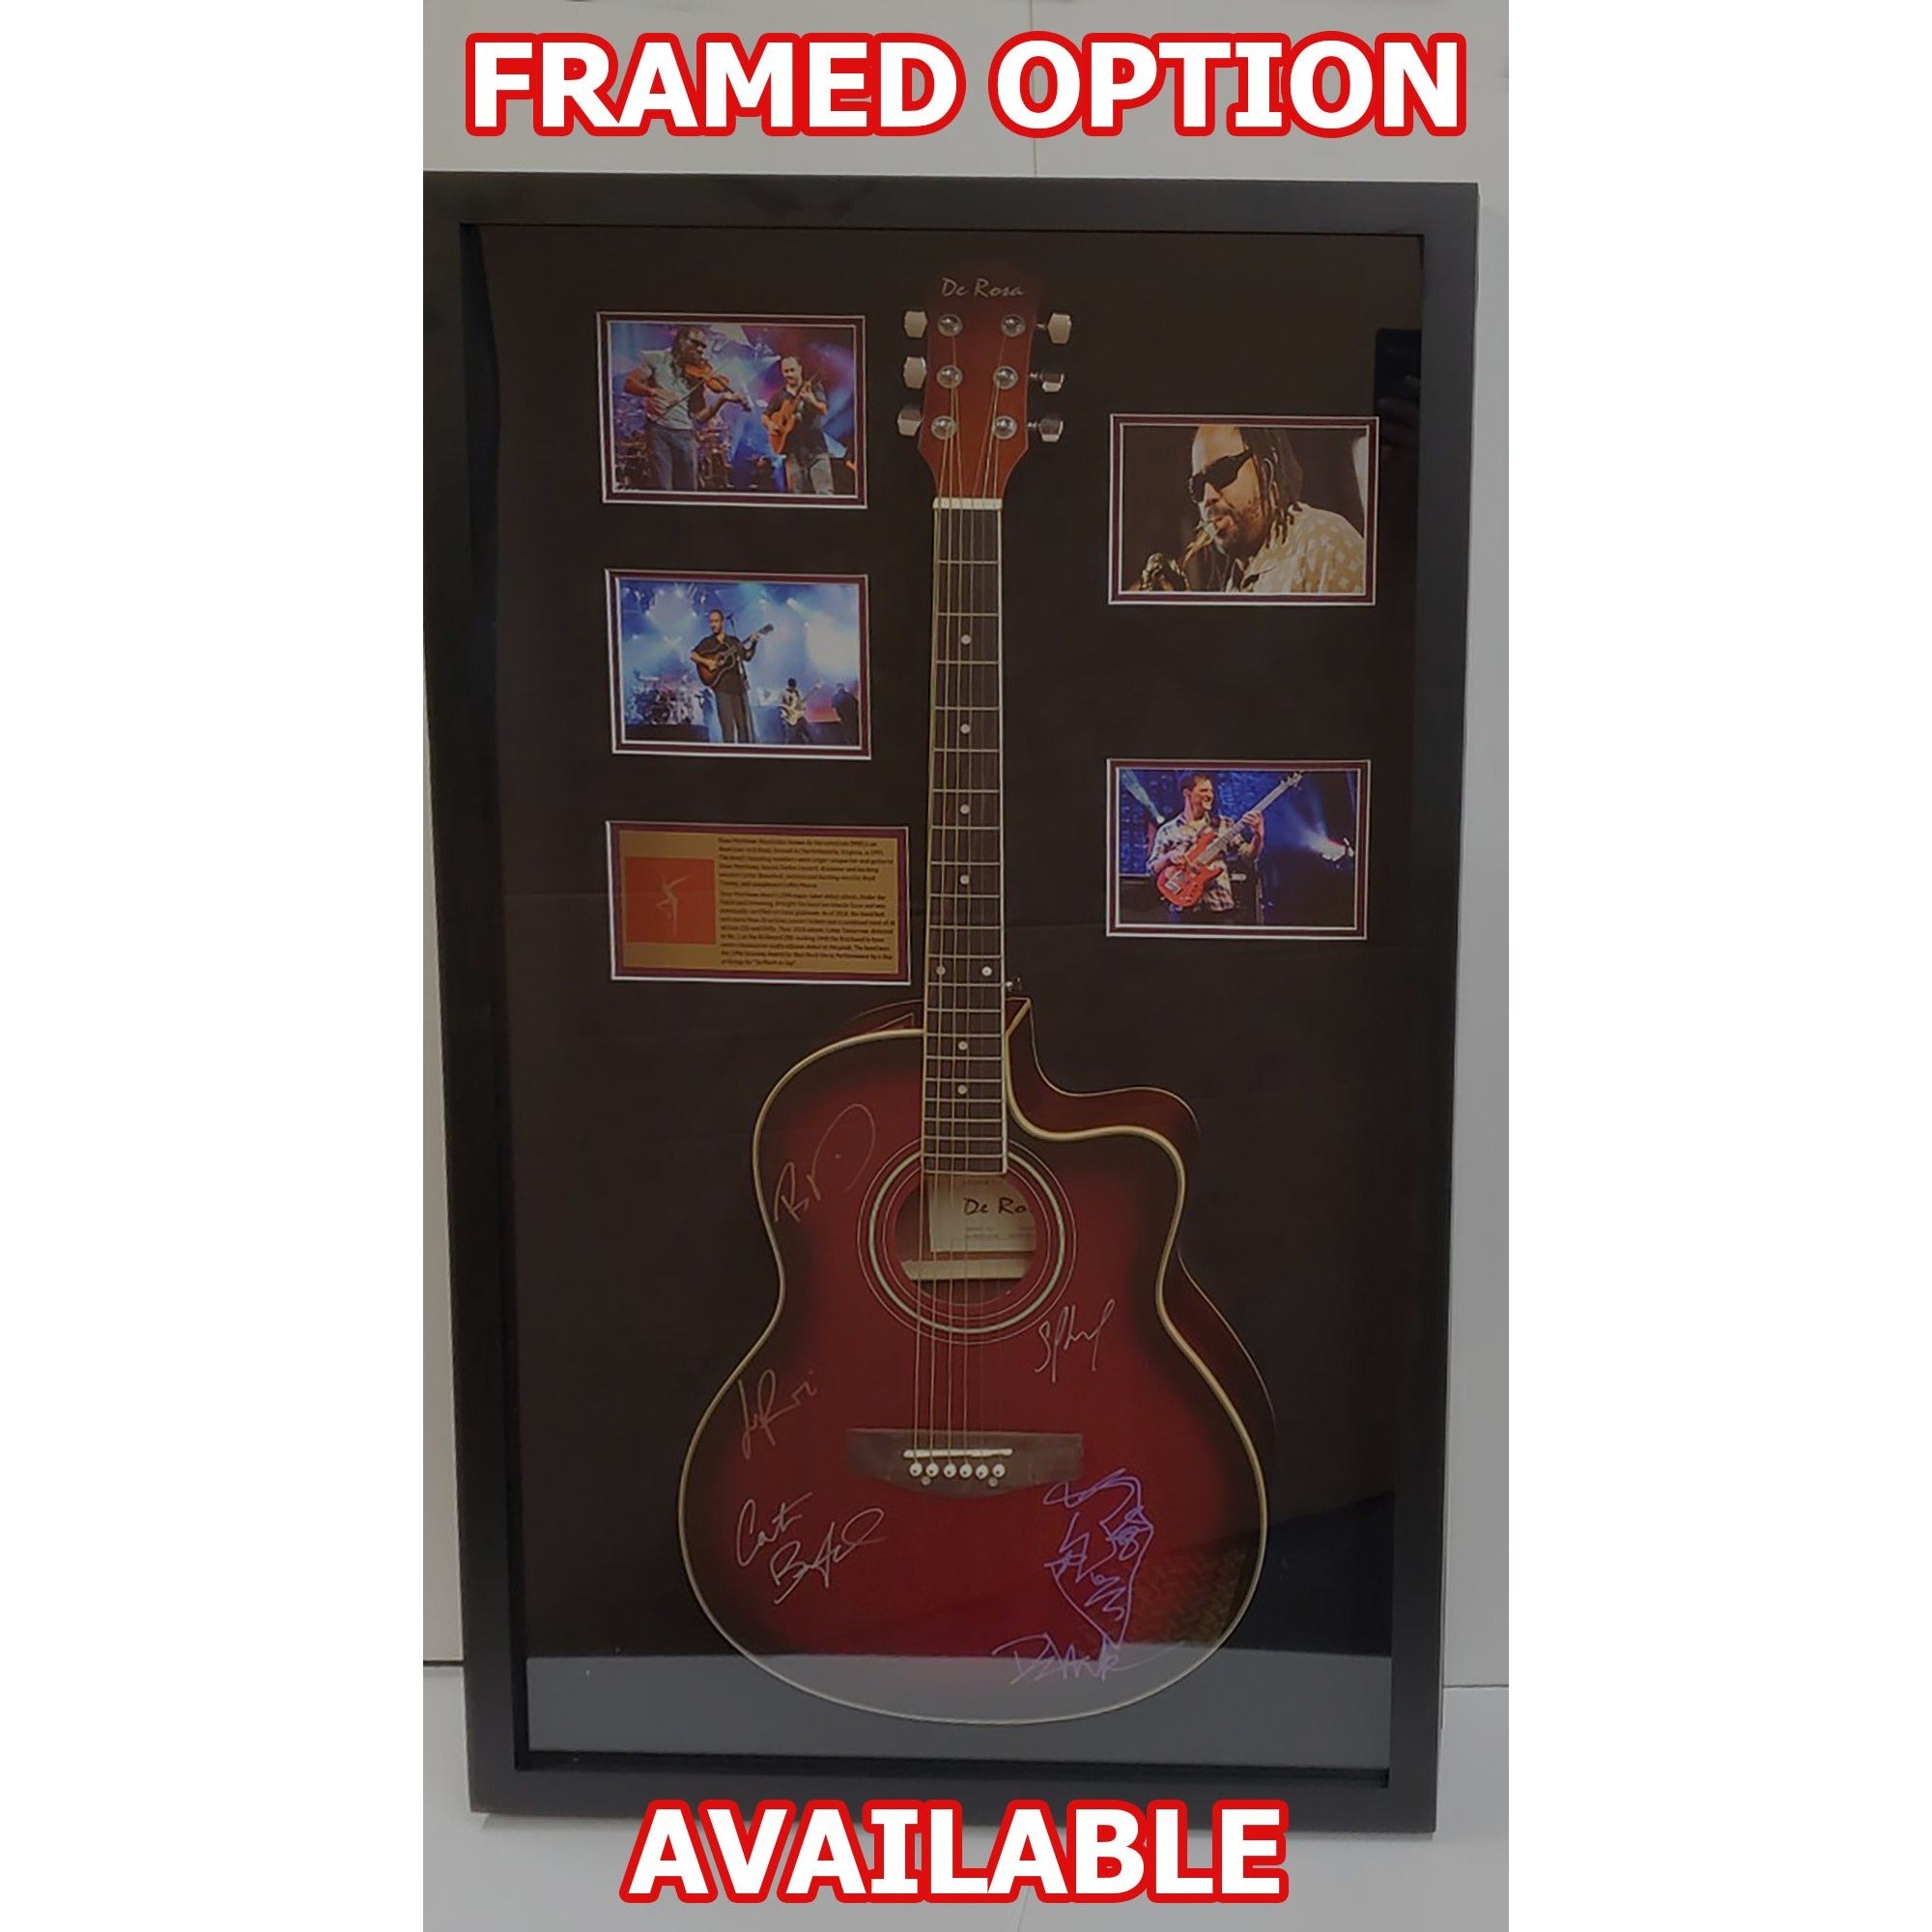 Eric Clapton signed with lyrics full size acoustic guitar with proof